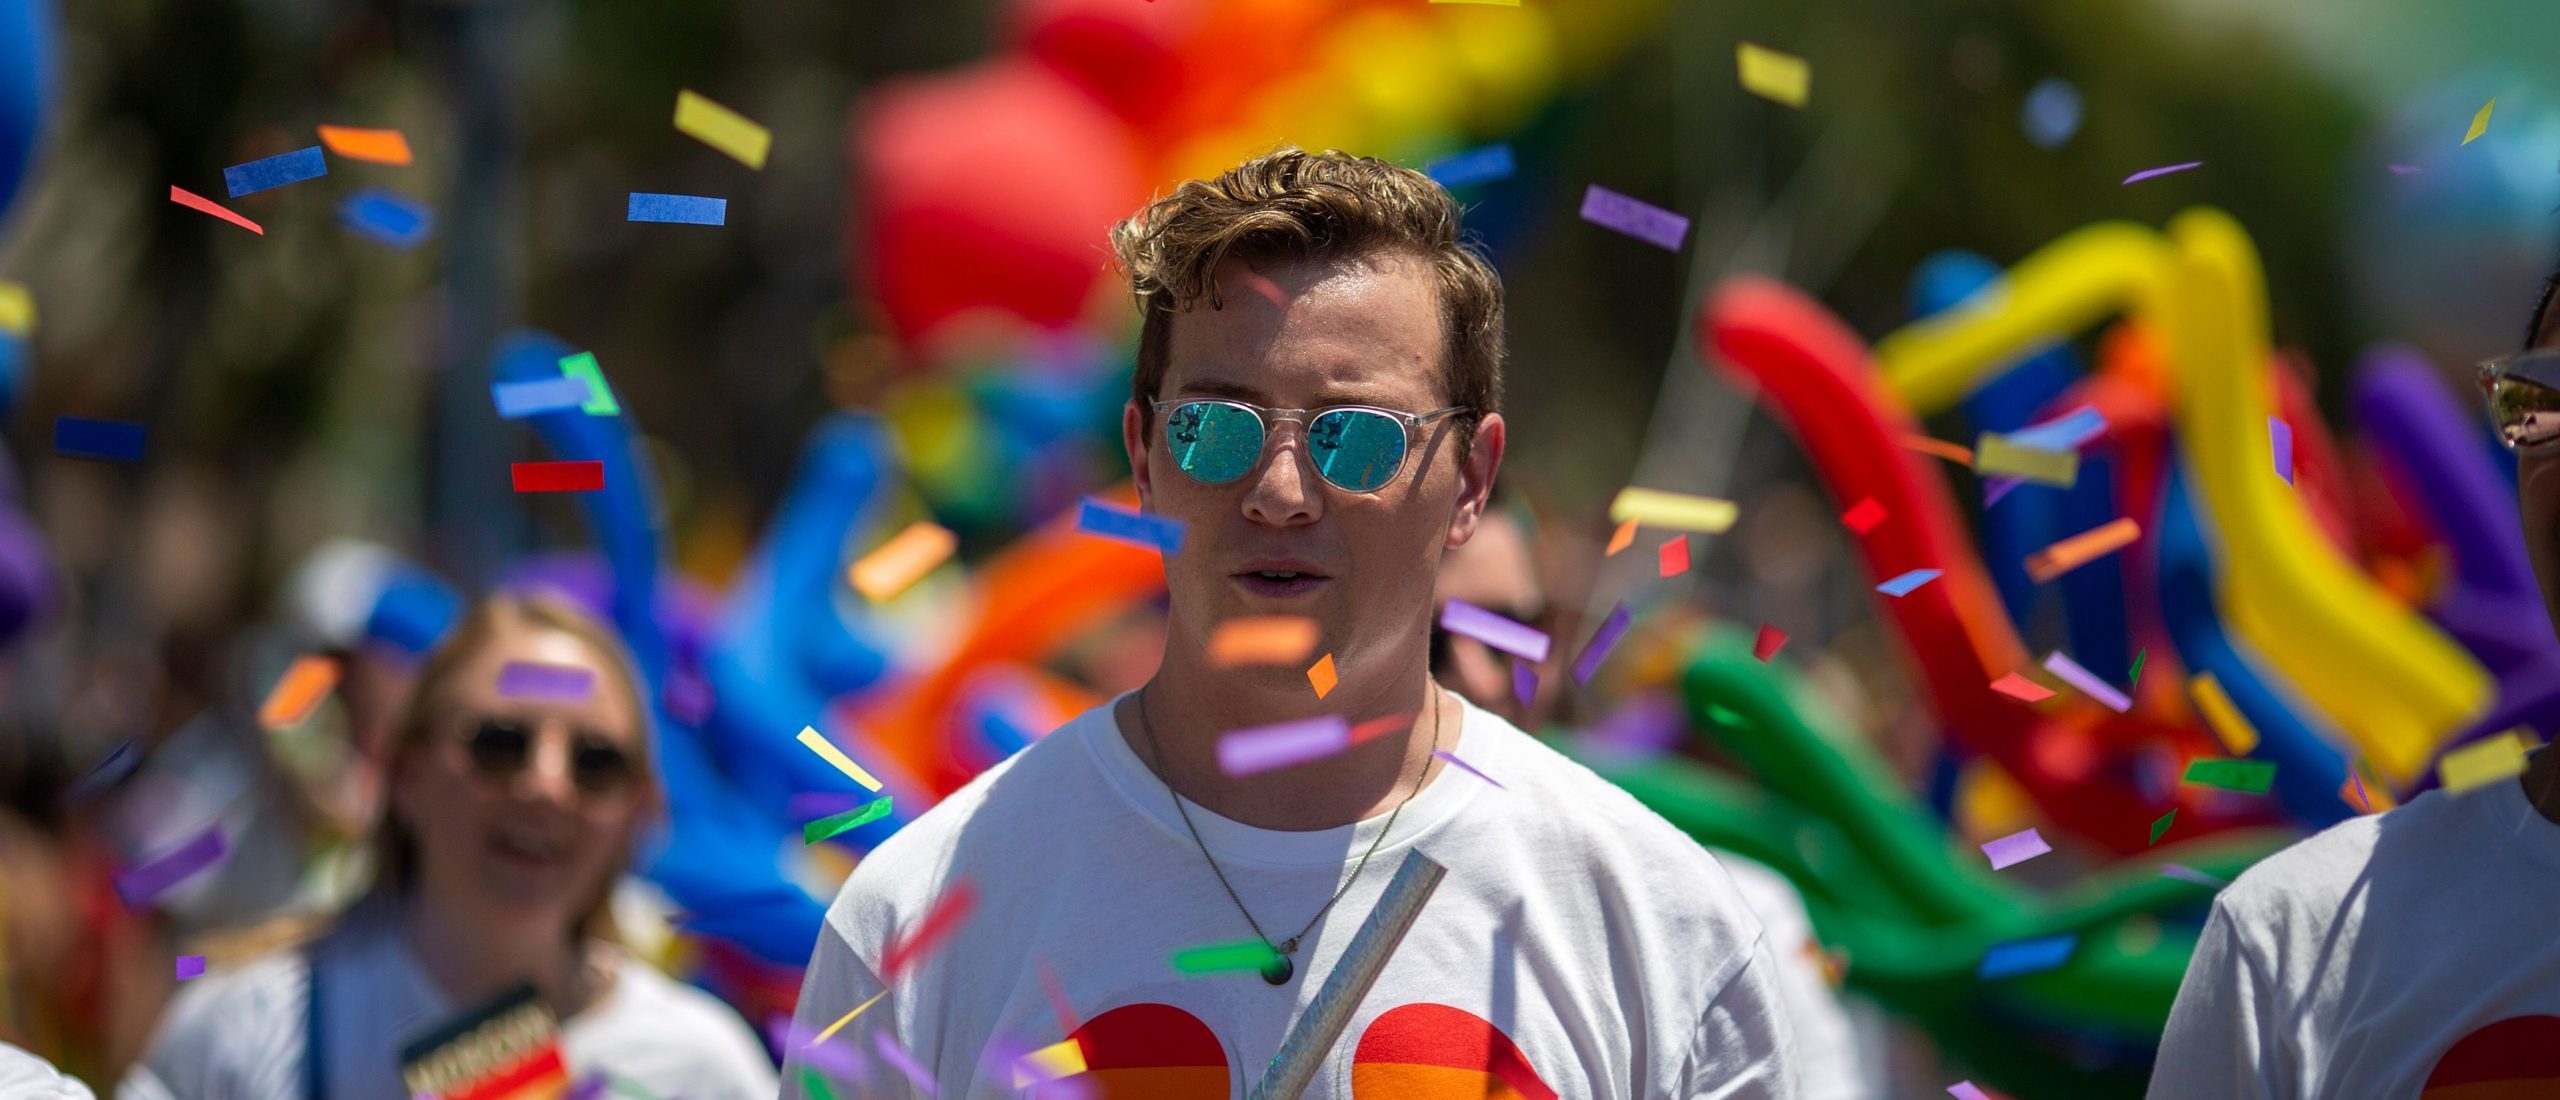 People from the Walt Disney Company participate in the annual LA Pride Parade in West Hollywood, California, on June 9, 2019. (DAVID MCNEW/AFP via Getty Images)